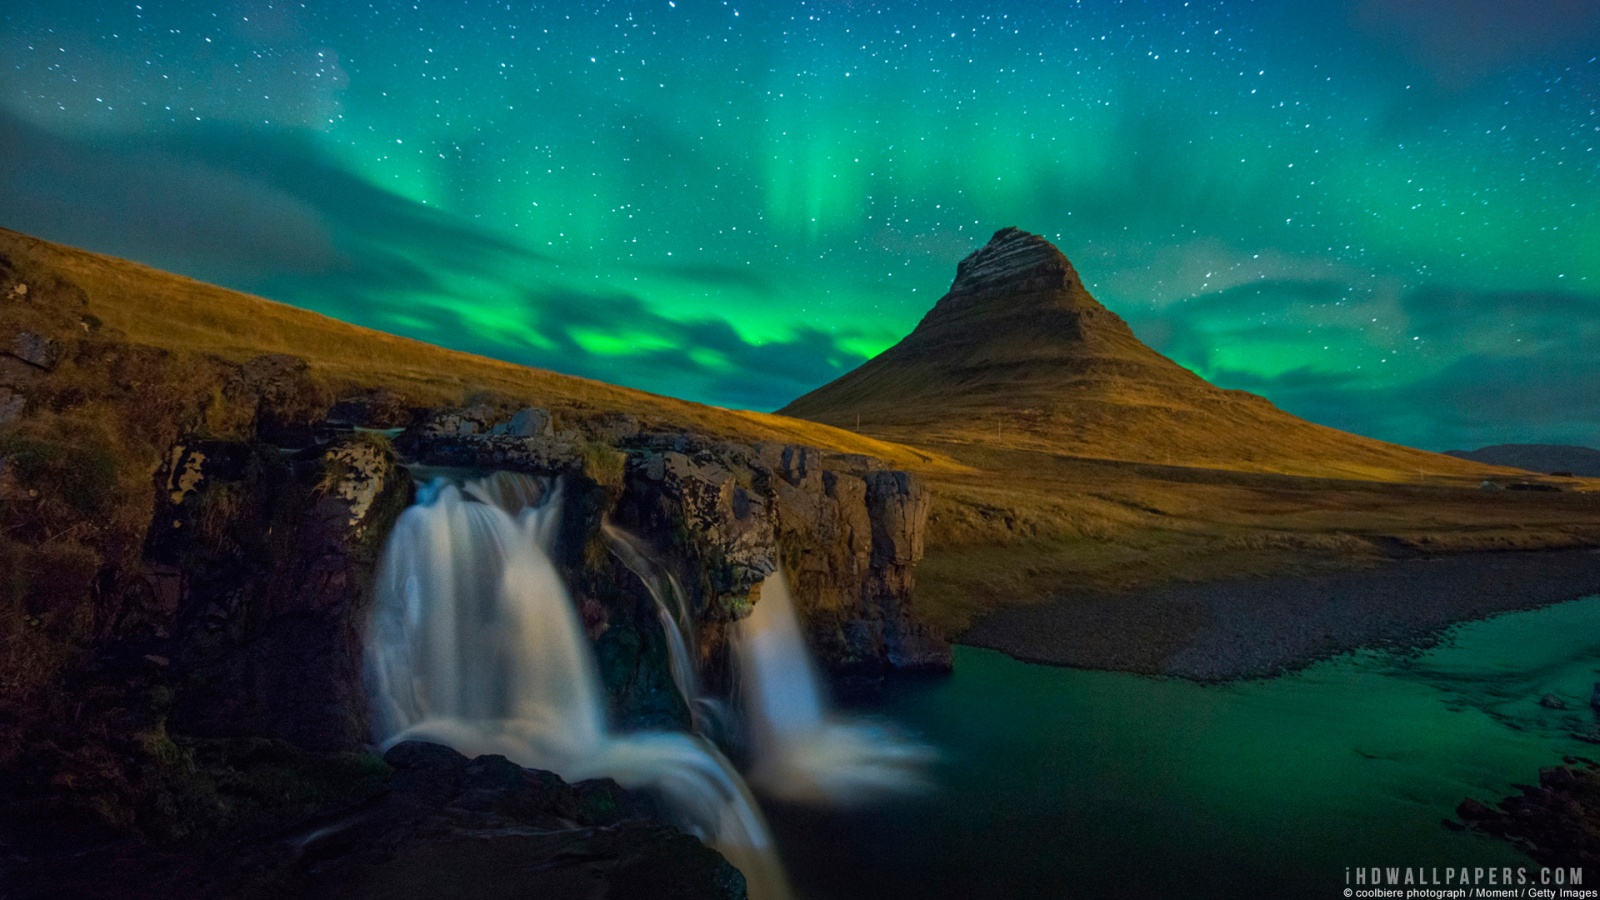  at Night in Snaefellsnes Iceland HD Wallpaper   iHD Wallpapers 1600x900